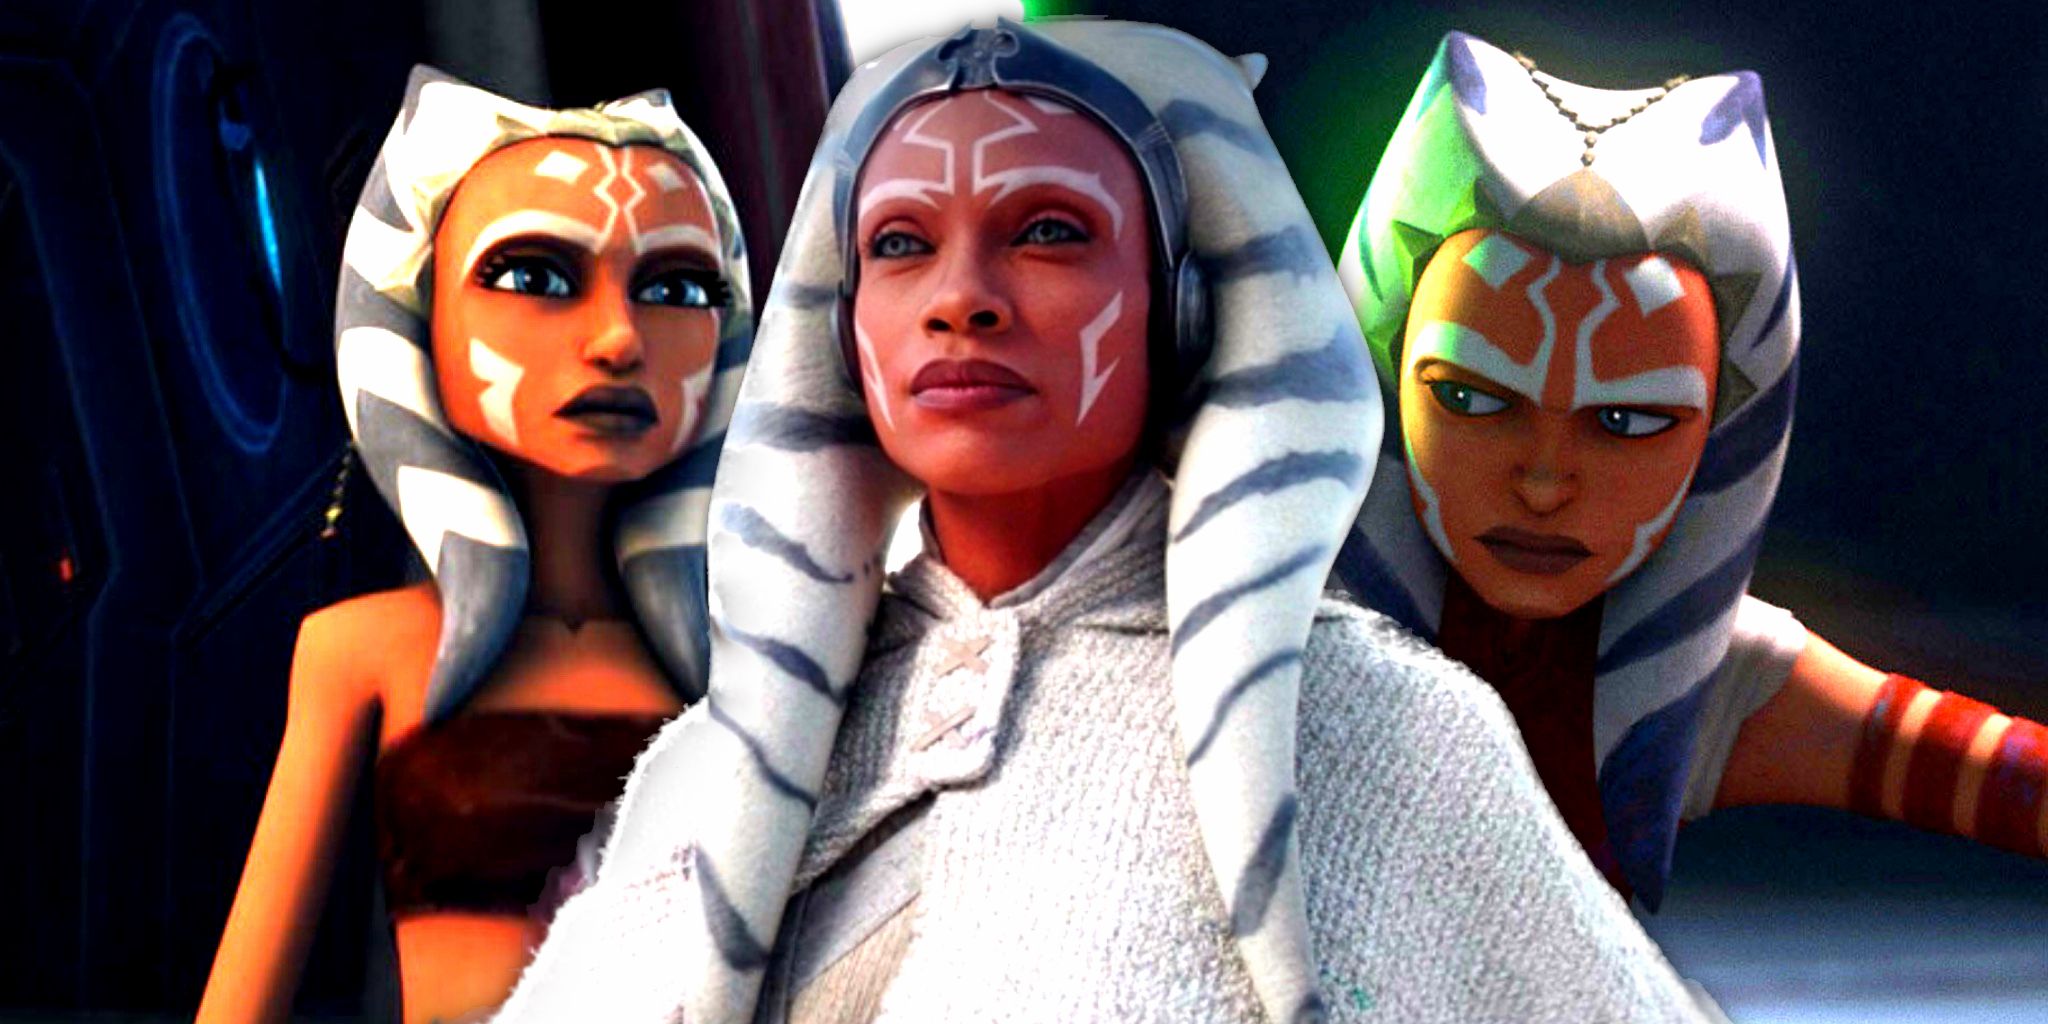 Ahsoka with her recent costume changes in Ahsoka, The Clone Wars, Tales of the Jedi